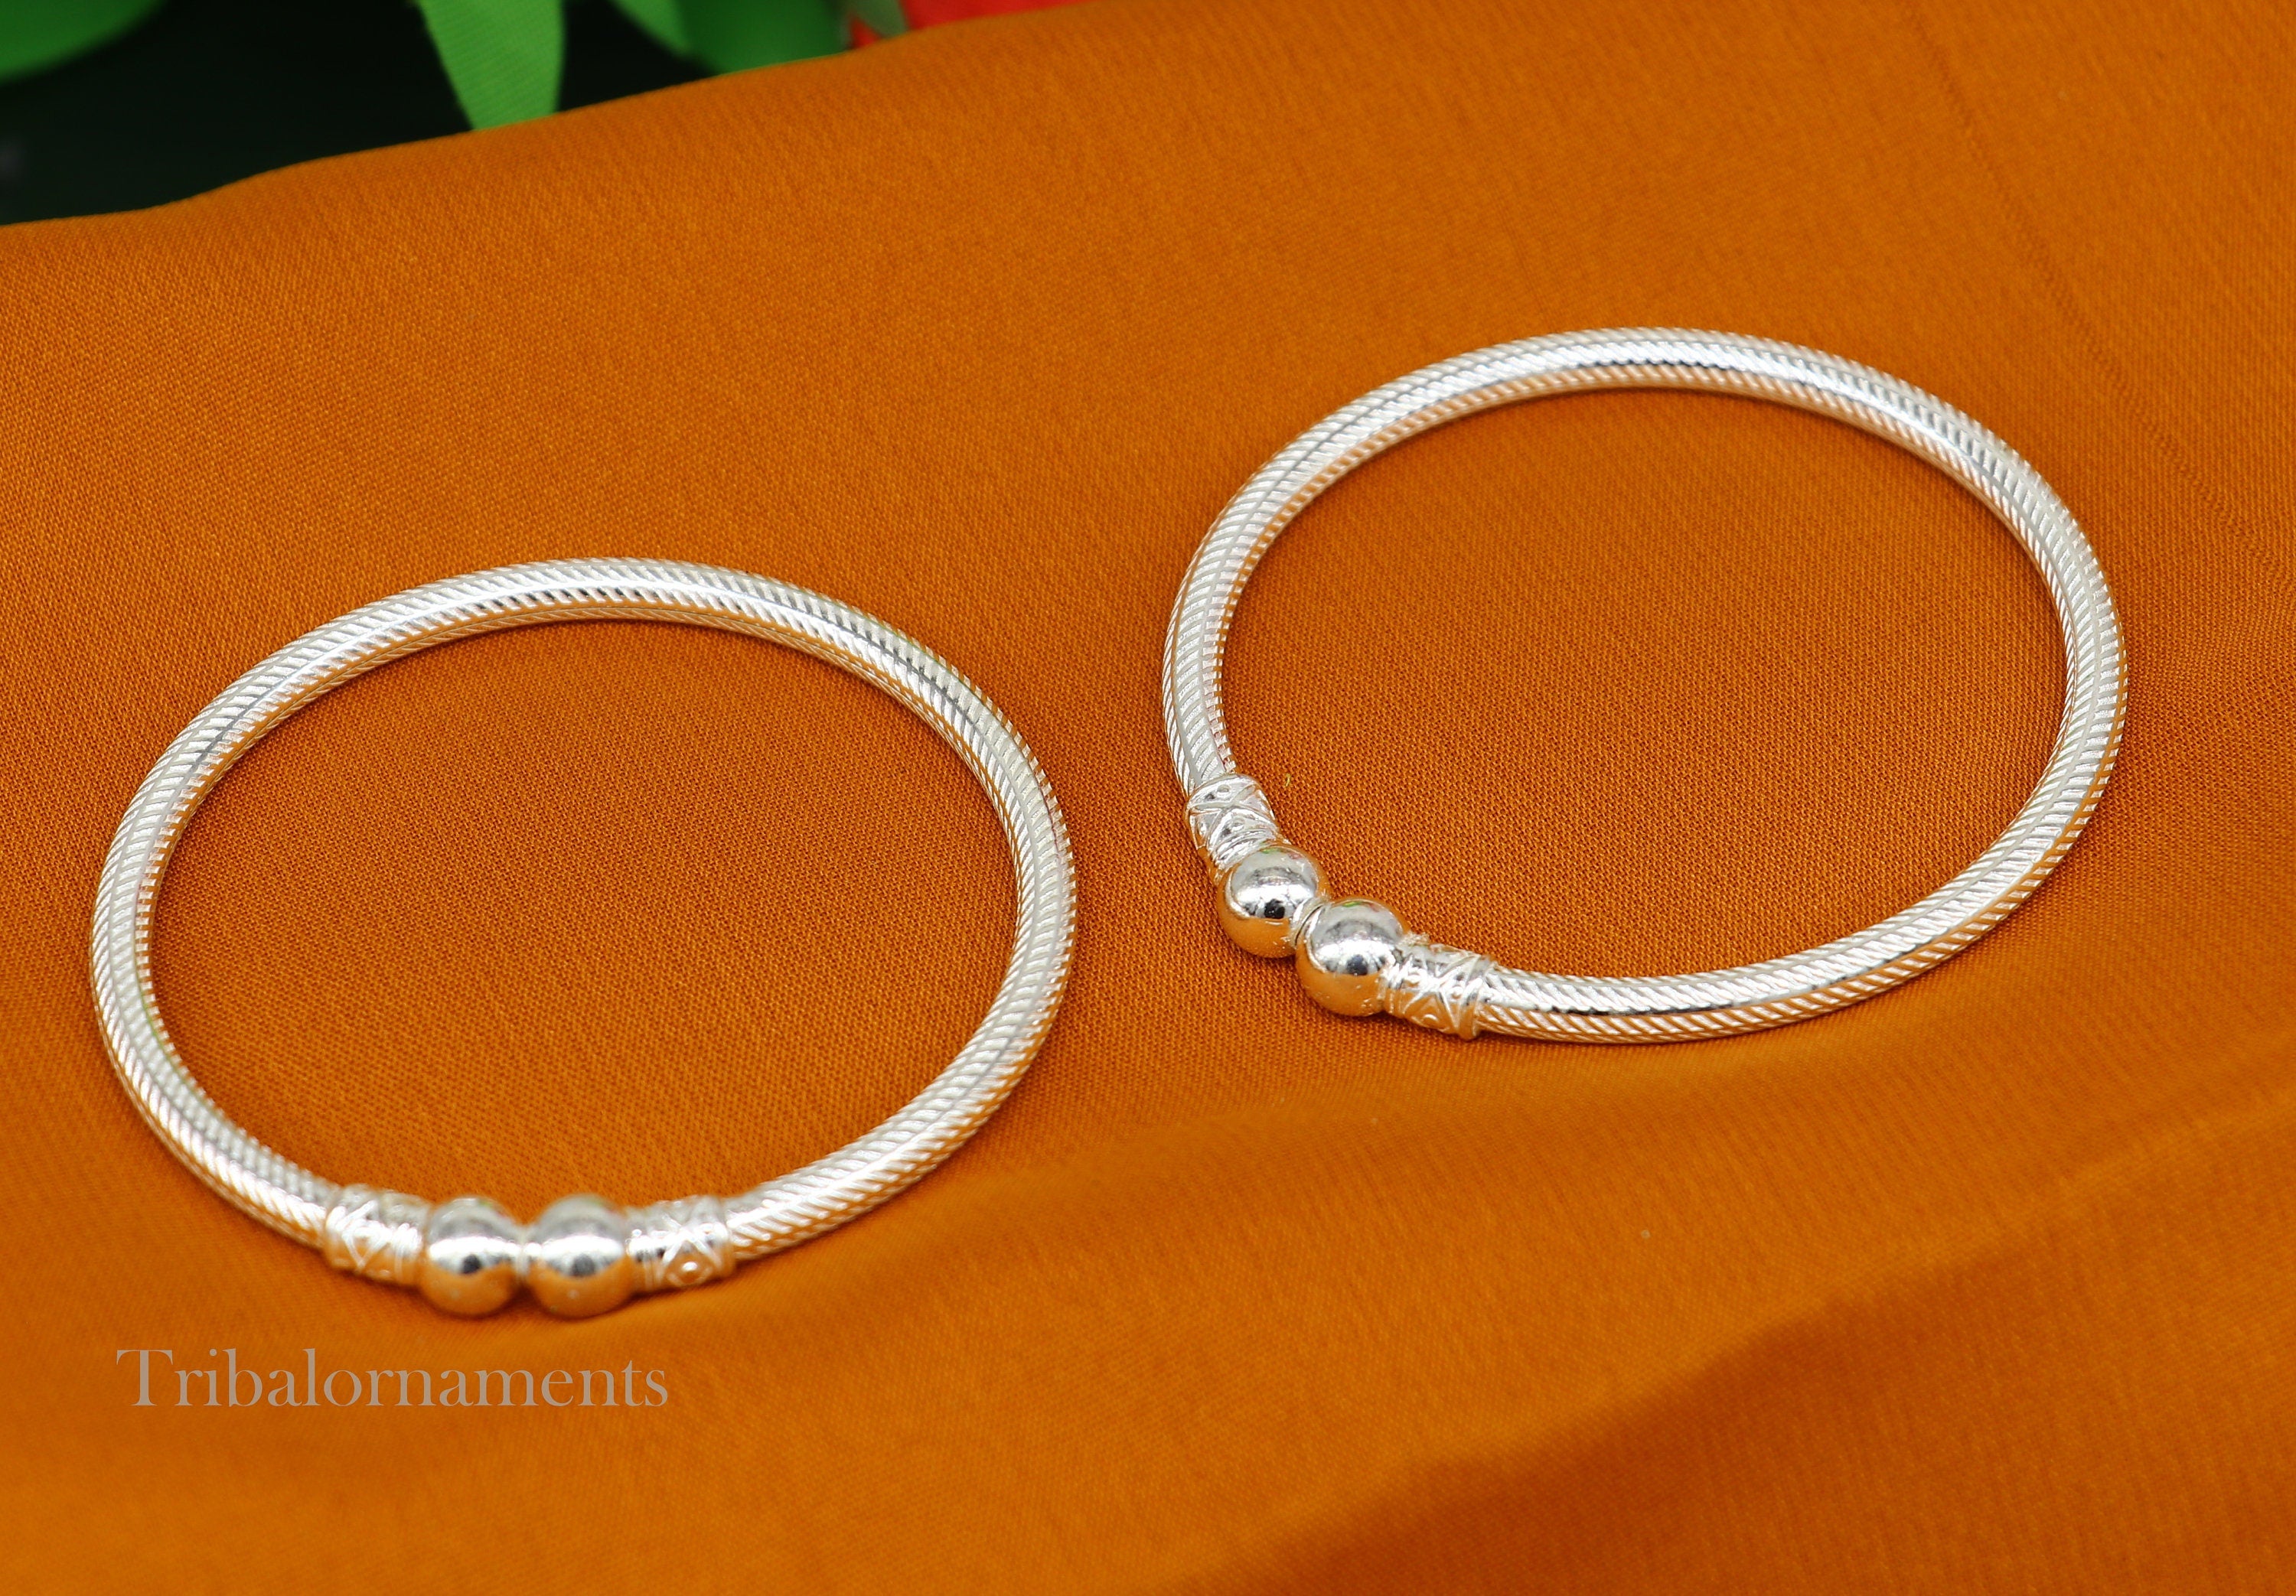 Shop Silver Bangles for women Online with Silverlinings